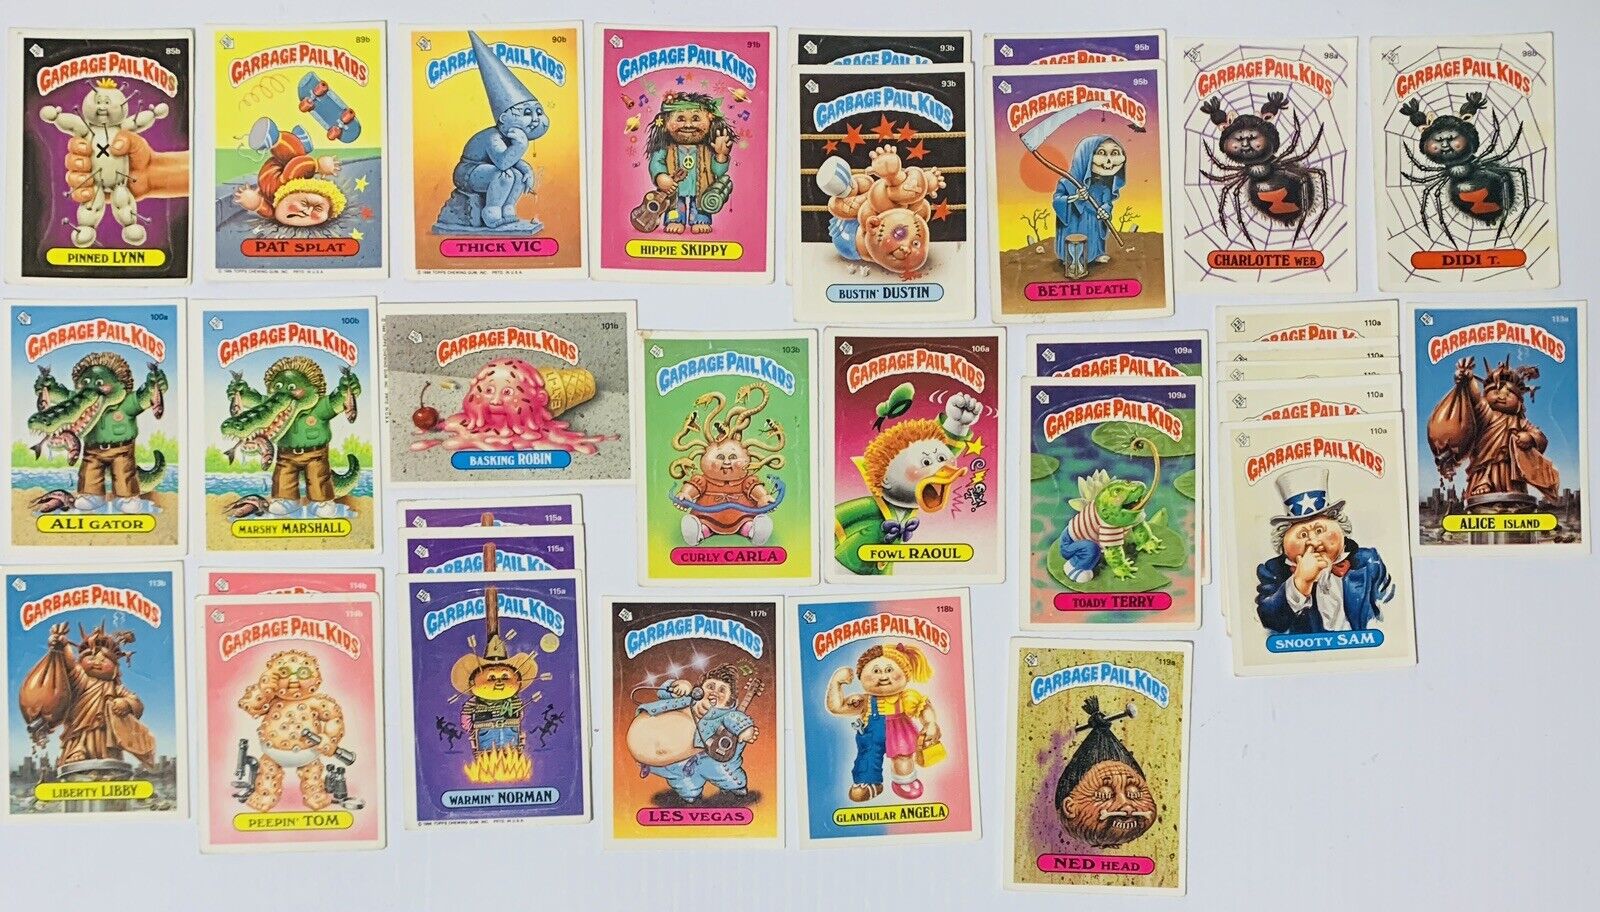 GARBAGE PAIL KIDS Trading Cards 1985 TOPPS Lot of 22 Different Cards +Duplicates